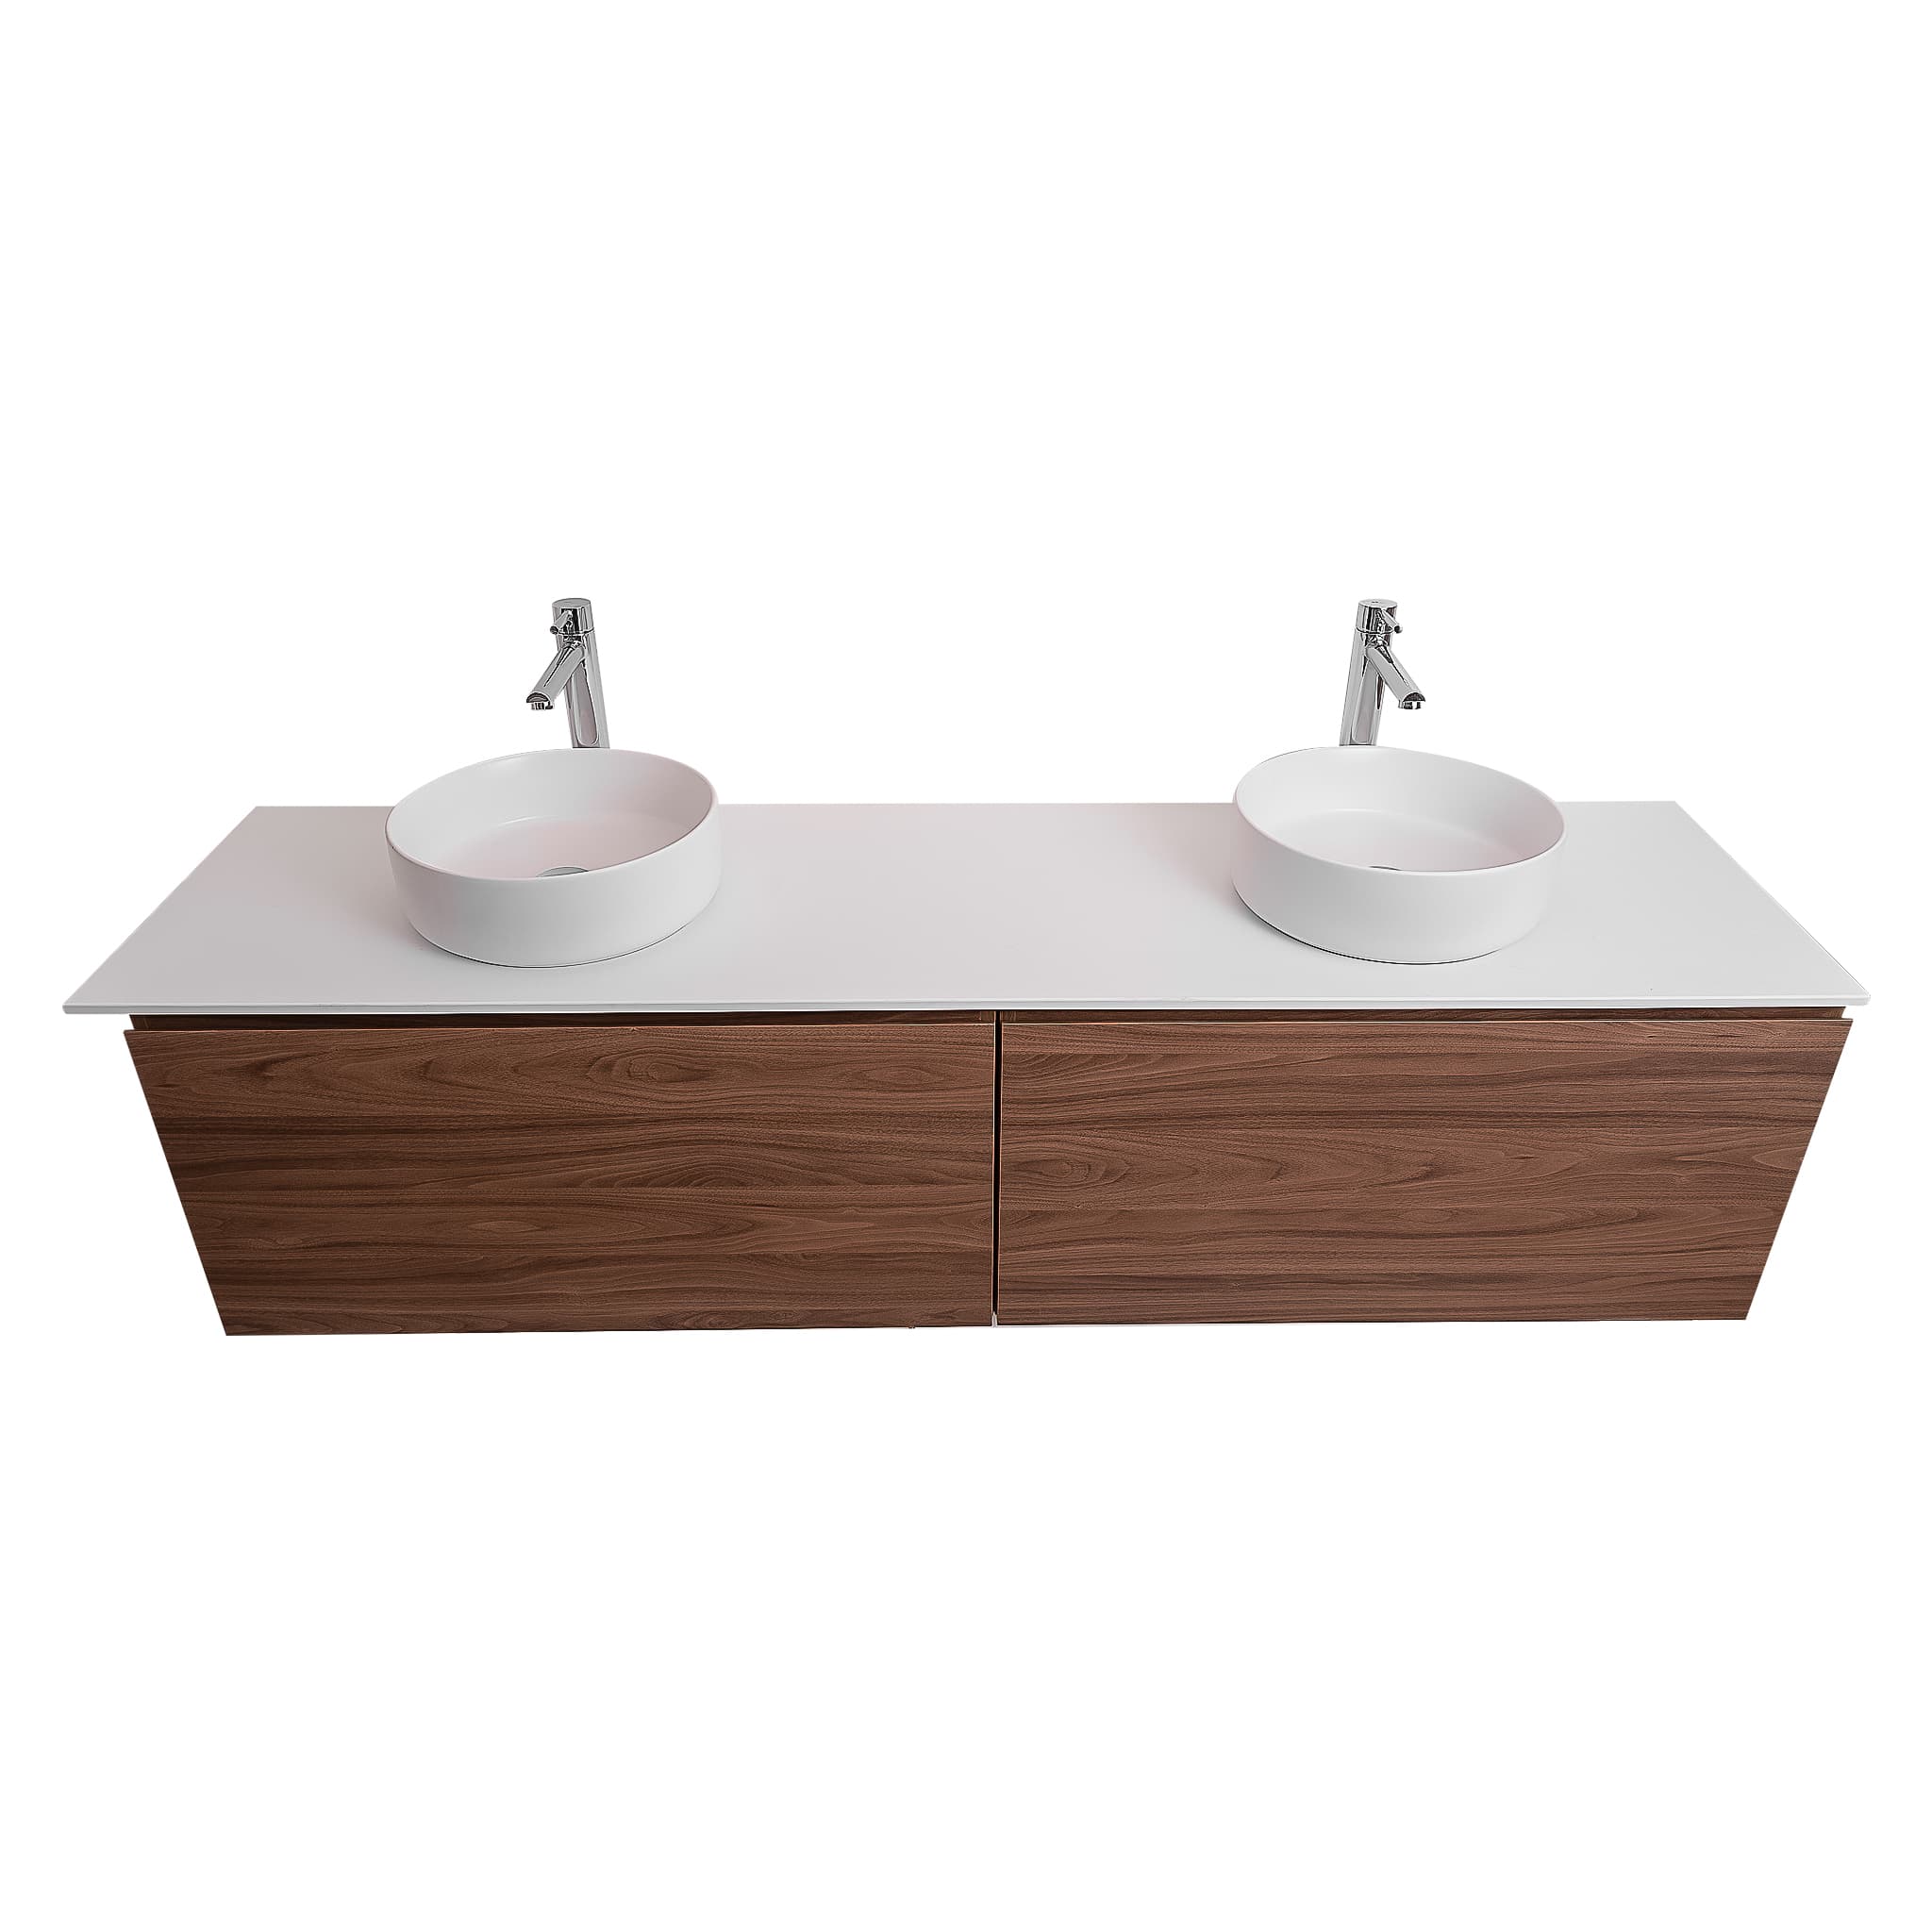 Venice 63 Walnut Wood Texture Cabinet, Ares White Top And Two Ares White Ceramic Basin, Wall Mounted Modern Vanity Set